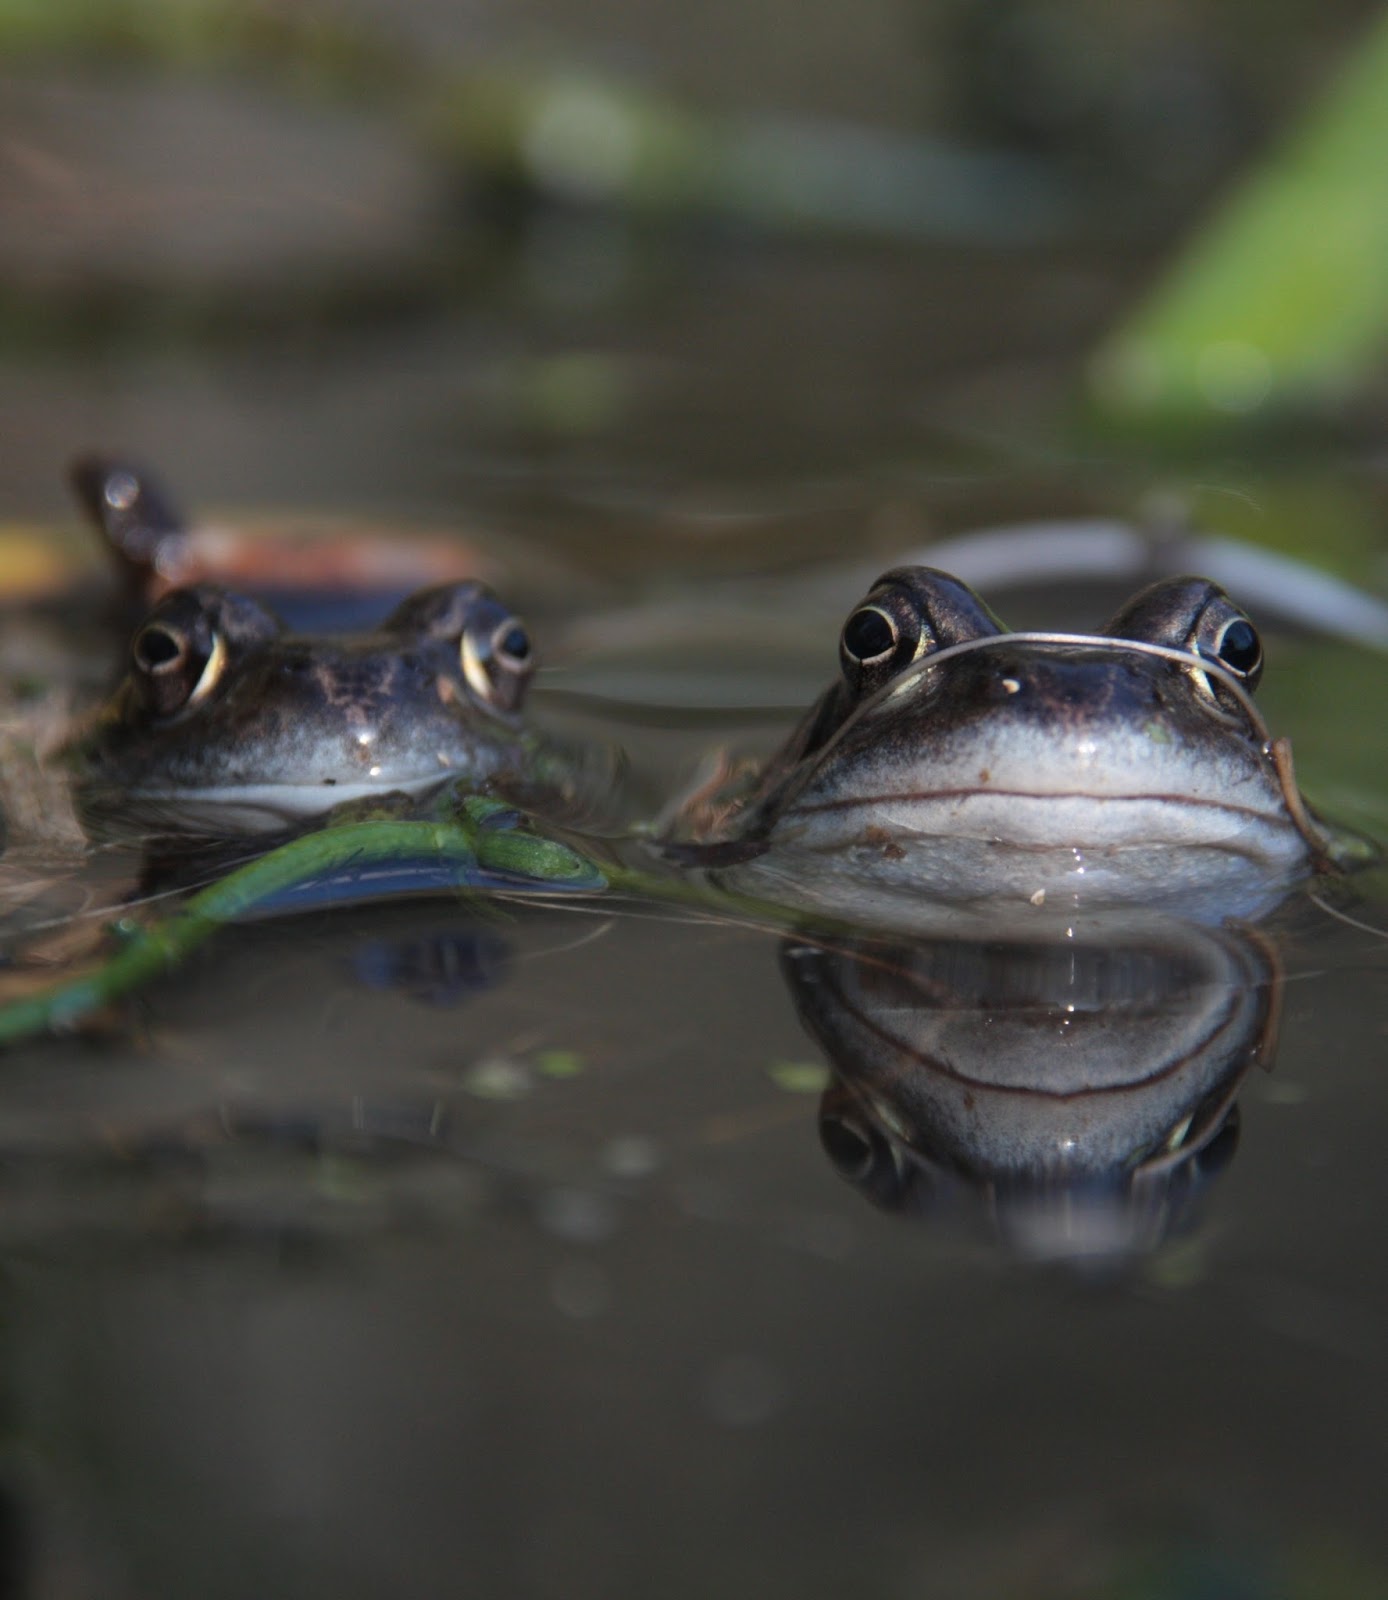 An interesting photo of two frogs.